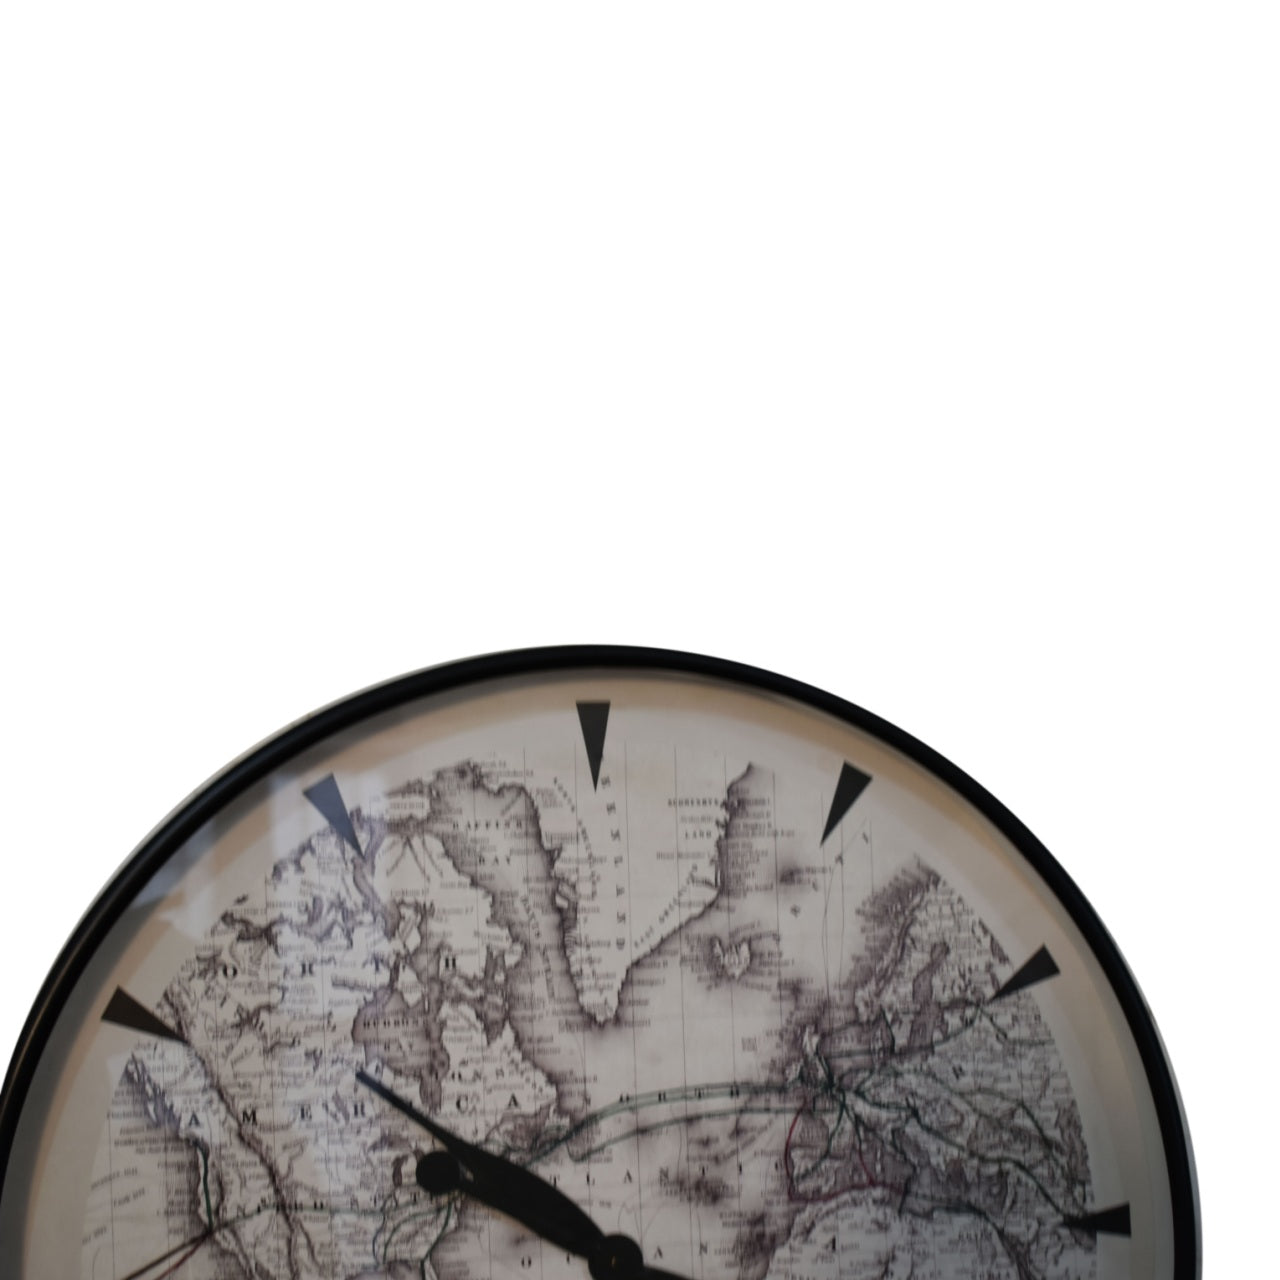 Atlas Style Wall Clock - Red Ross Retail-Furniture Specialists 